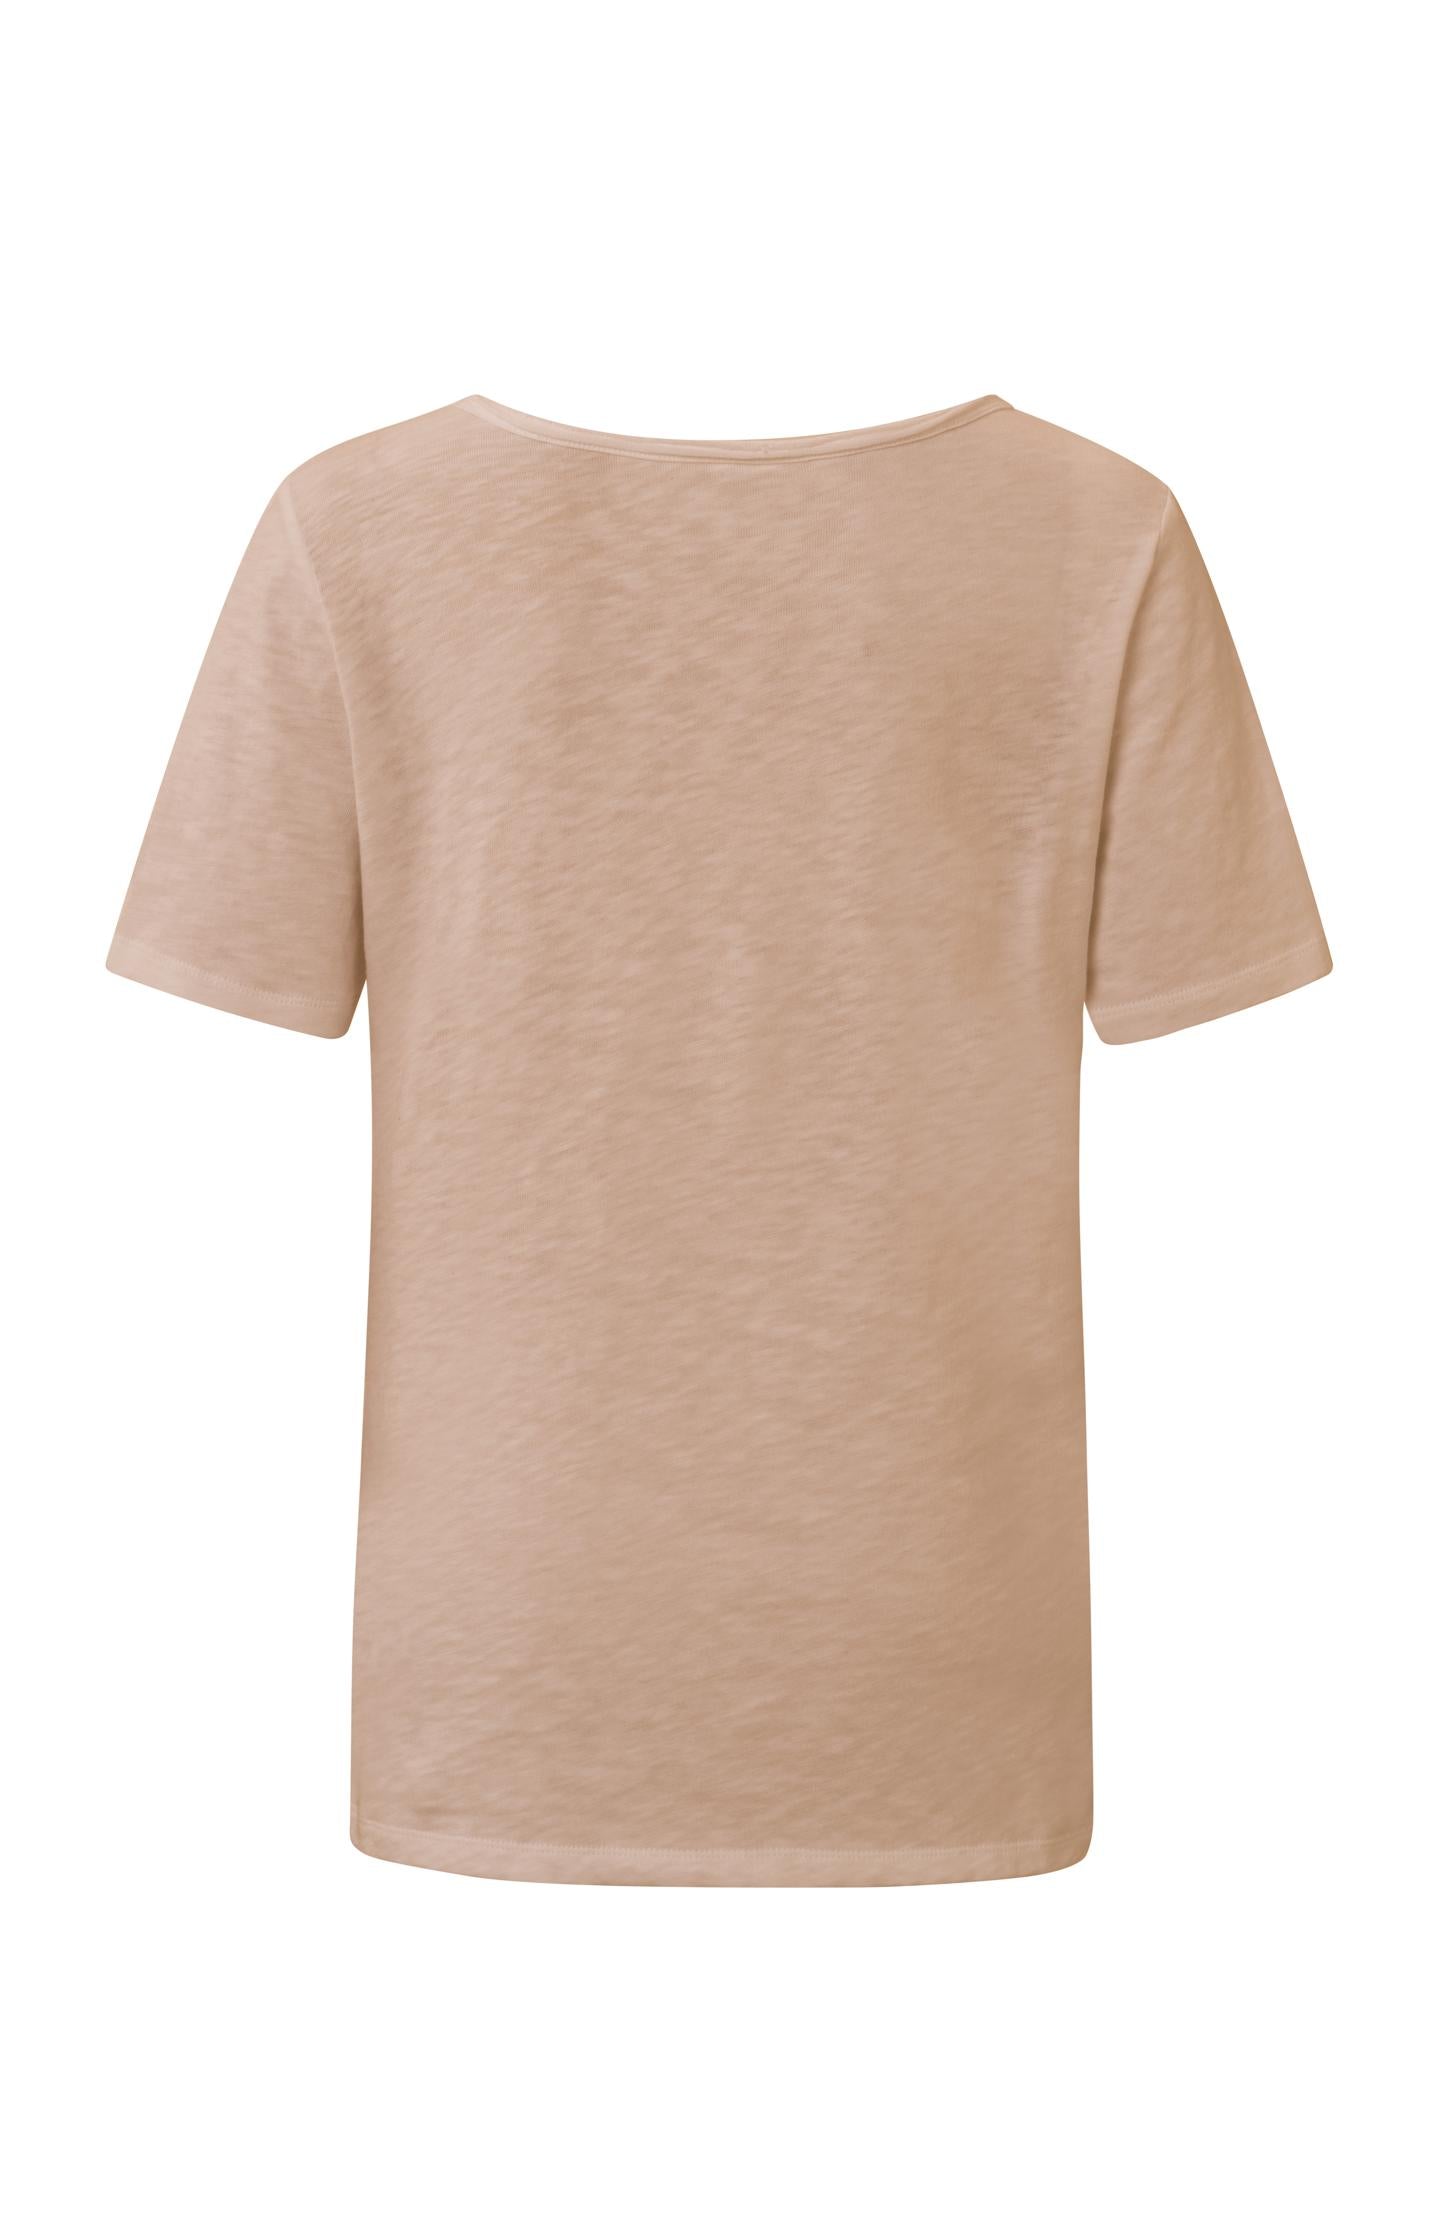 T-shirt with deep V-neck, short sleeves and frayed details